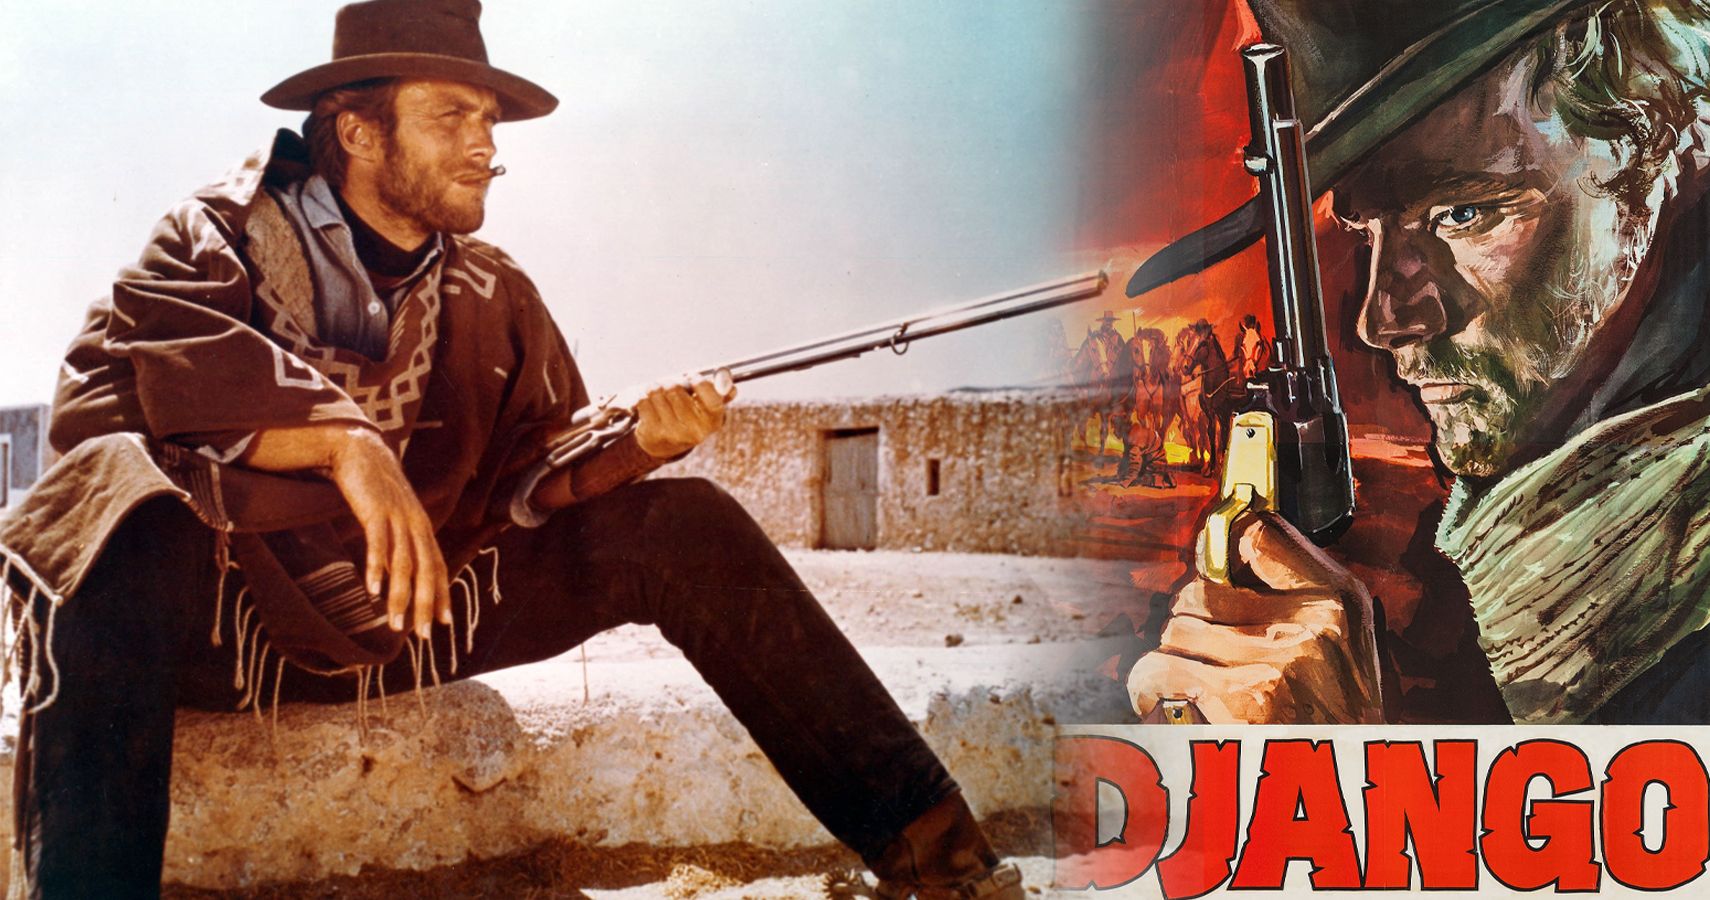 Custom image of Clint Eastwood and a poster for Django